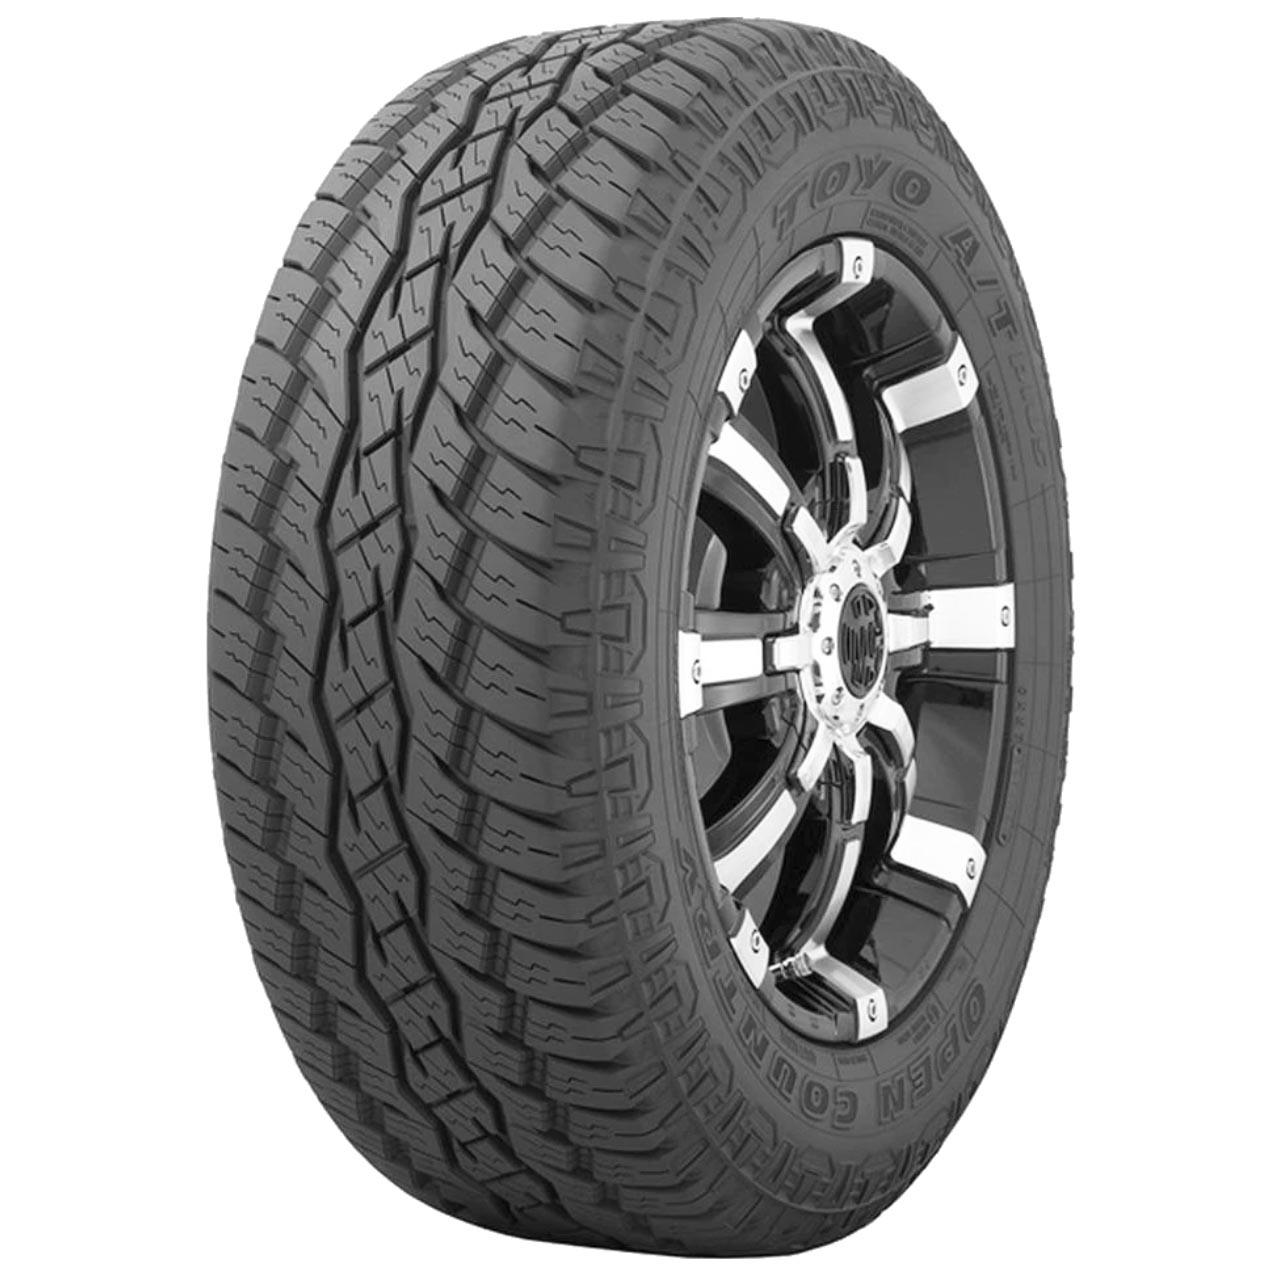 Toyo Open Country AT Plus 31X10.50R15C 109S